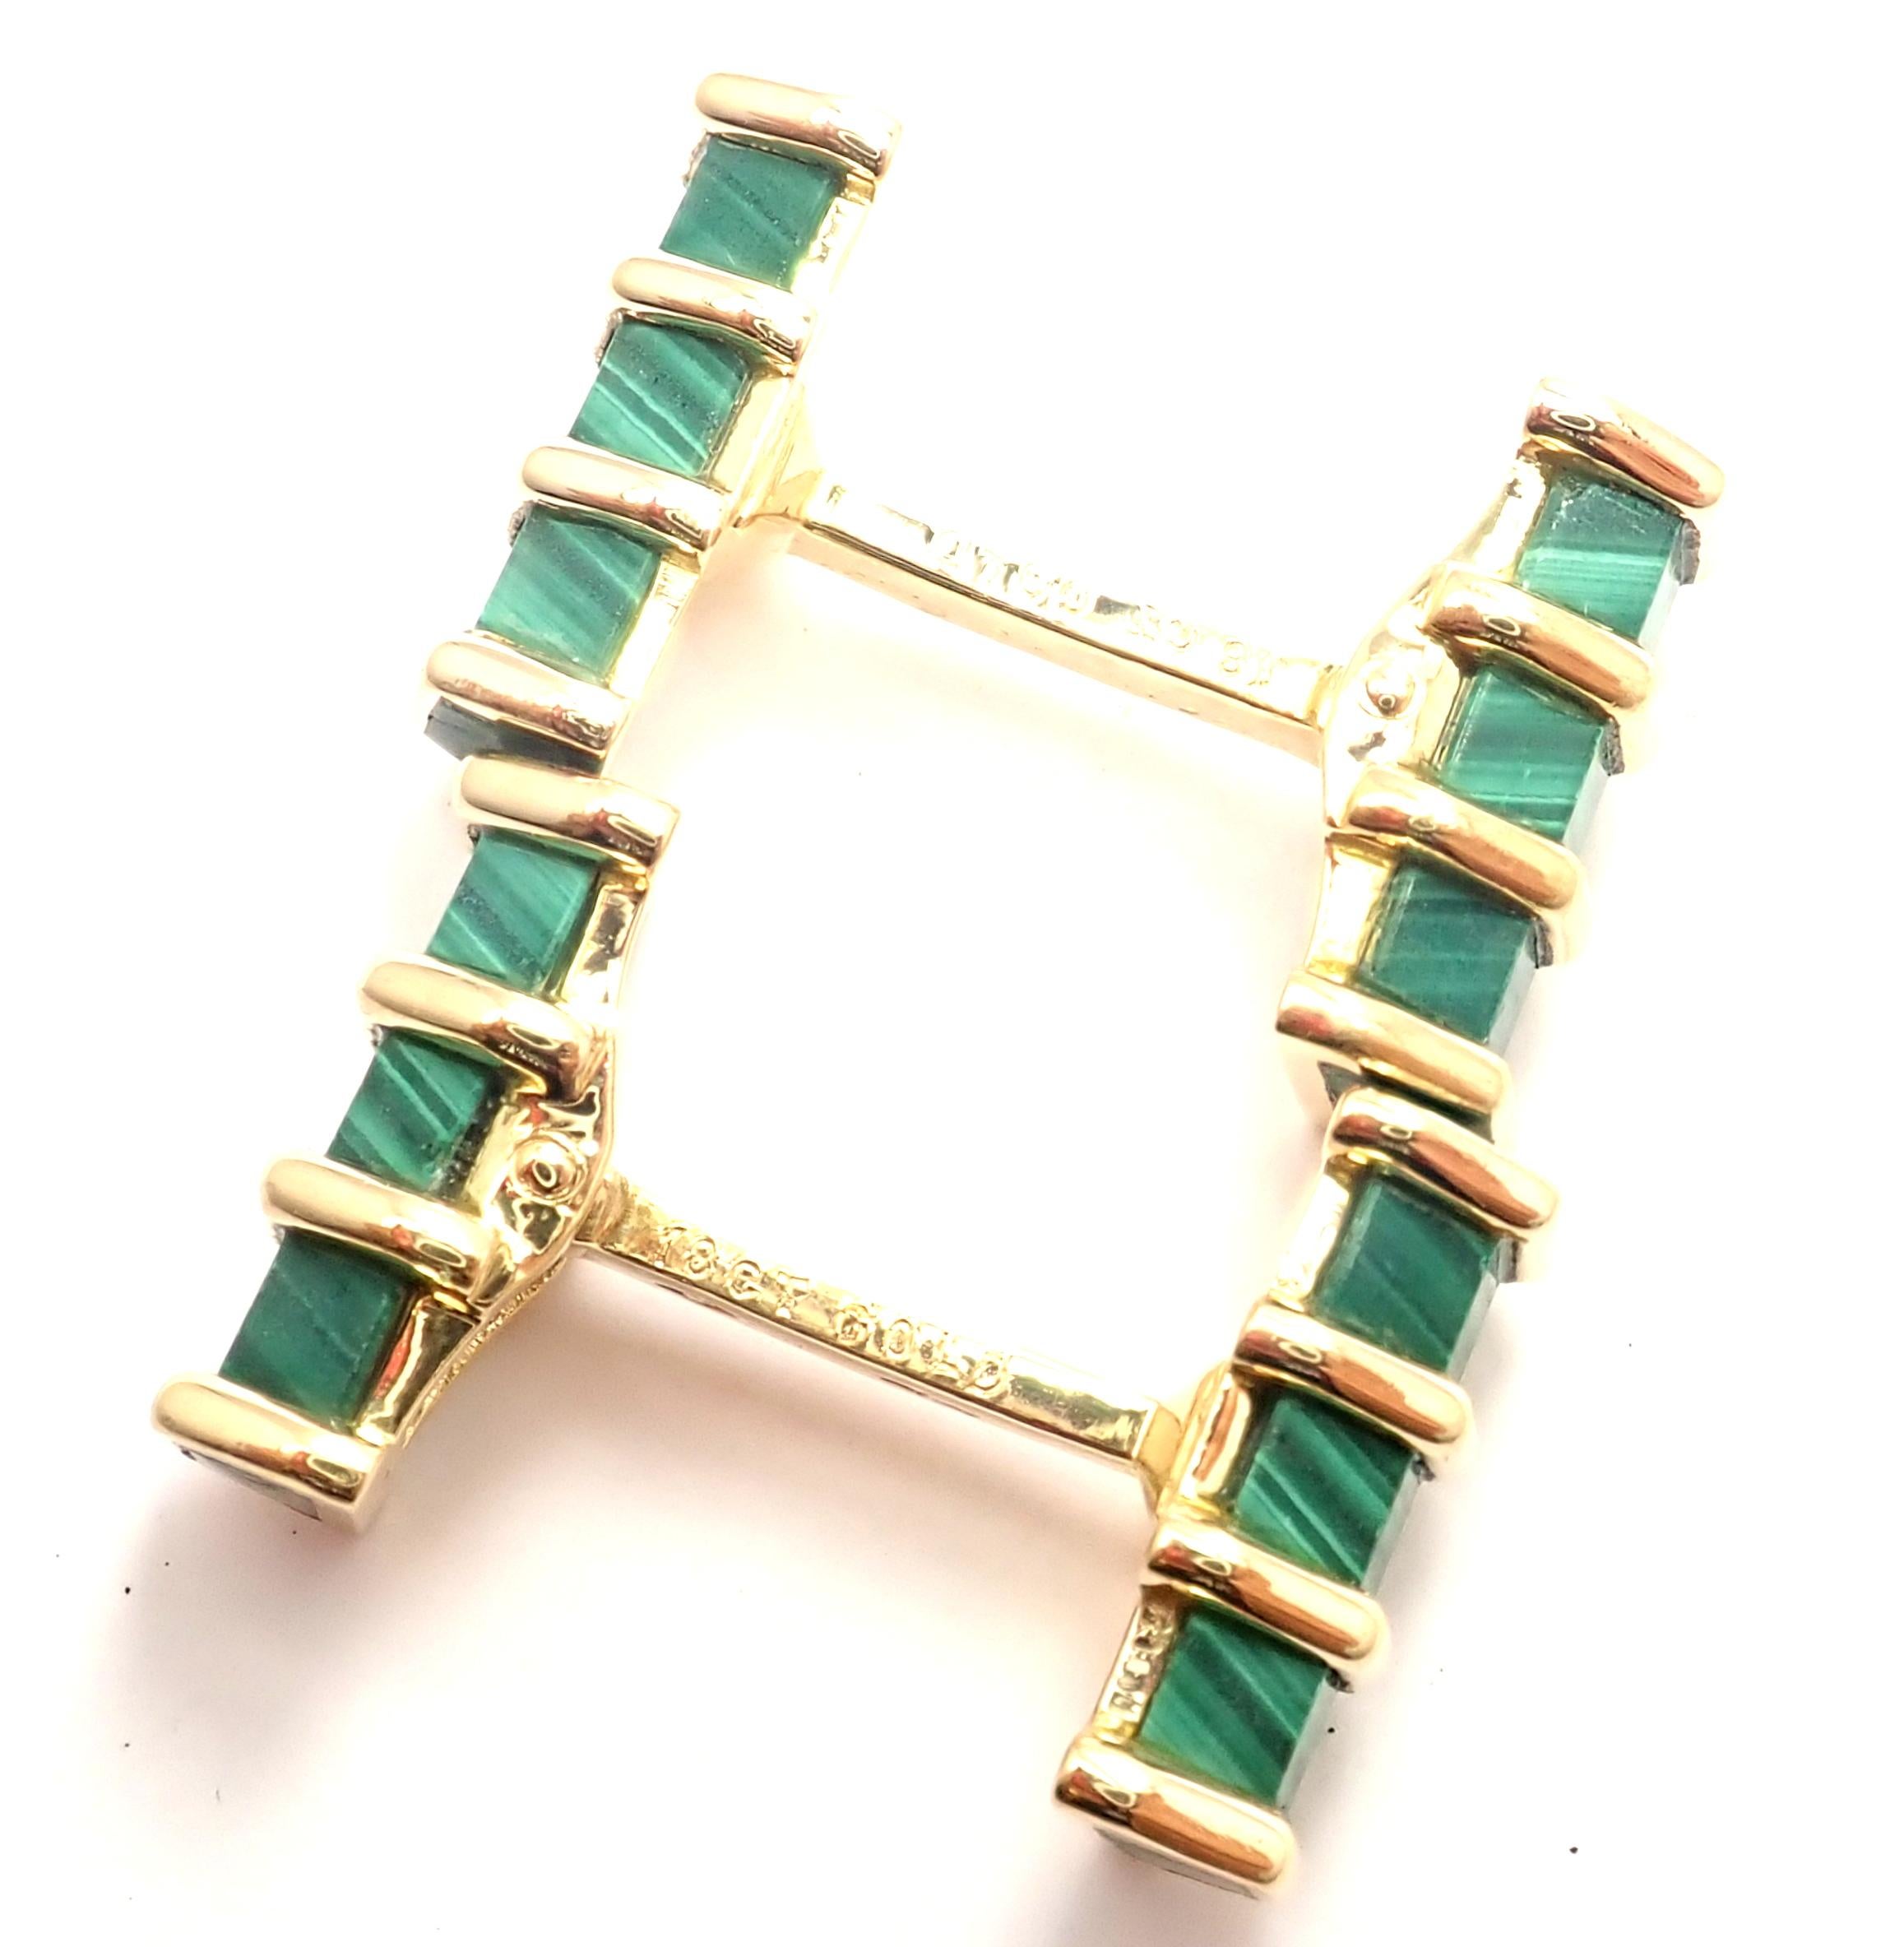 18k Yellow Gold Malachite Cufflinks From Tiffany & Co France.
With malachite stones.
Details: 
Dimensions: 16mm x16mm x 25mm
Weight: 12.9 grams
Stamped Hallmarks: Tiffany & Co. France 18ct Gold French Hallmarks
*Free Shipping within the United